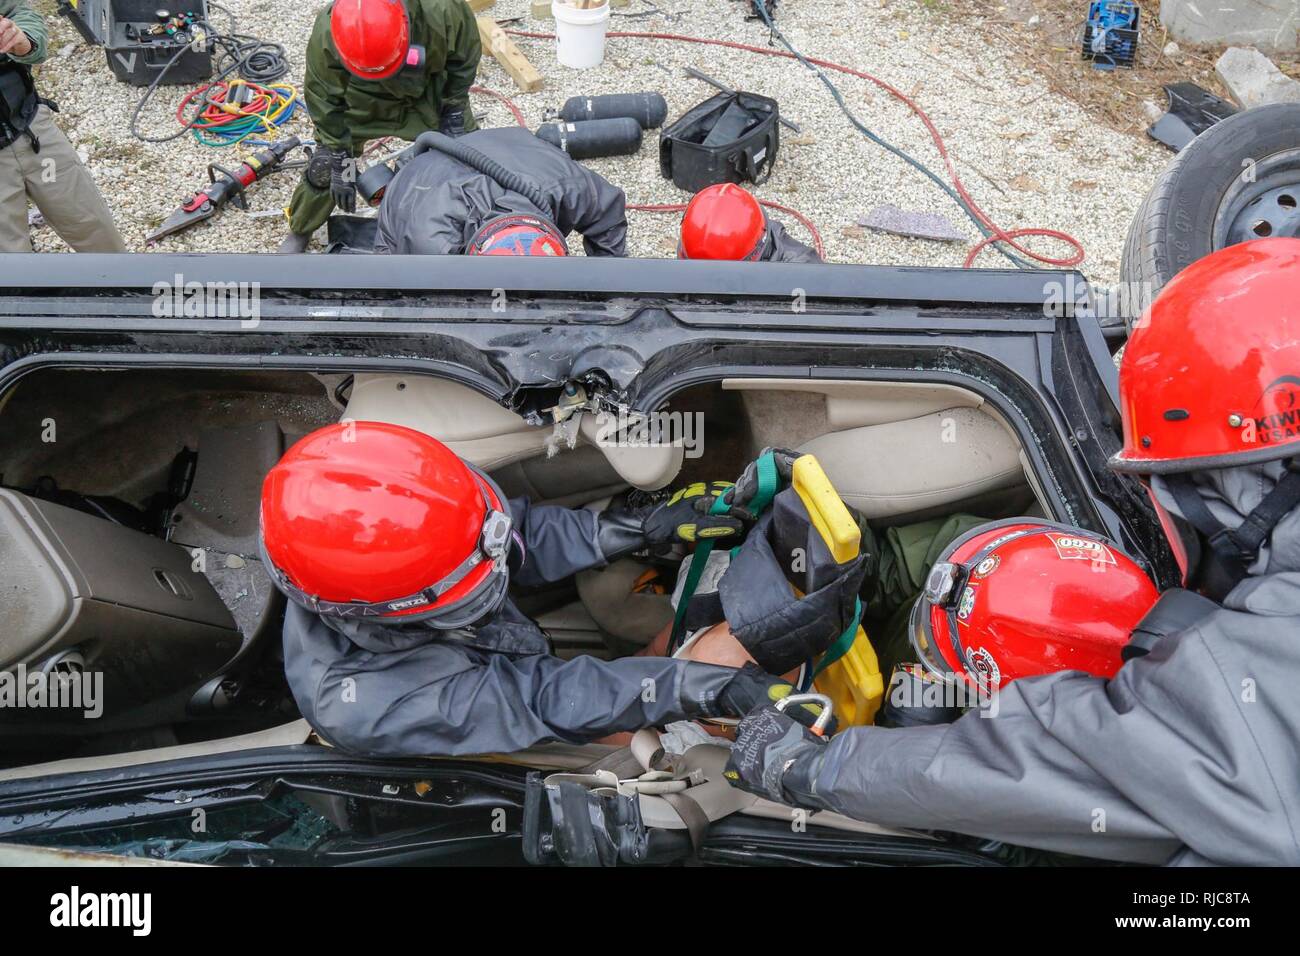 U. S. Army Reserve Soldiers assigned to 424th engineer Company extract a dummy casualty from an overturned vehicle in a Joint Training Exercise on Miami-Dade Fire Rescue Urban Search and Rescue Training Site in Miami, Fla. Jan. 10, 2018. This JTE focused on building response capabilities and seamless transition between the local first responders and the follow-on support provided by the National Guard and Active duty soldiers. (U. S. Army Stock Photo